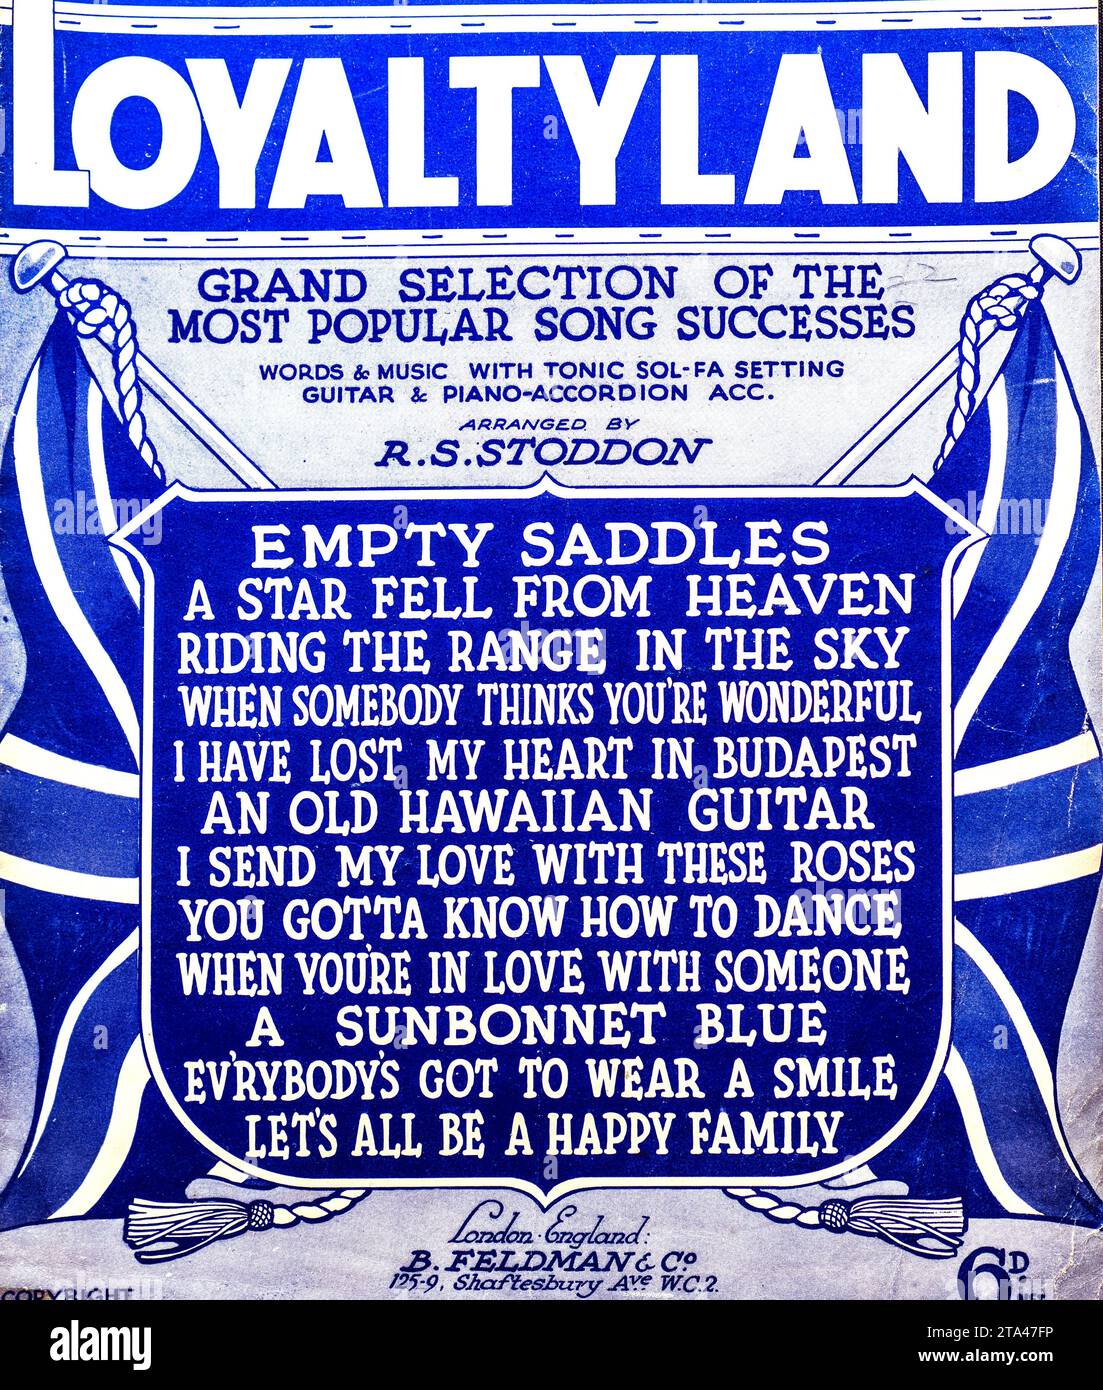 Vintage Compilation Music Sheet - 'Loyaltyland'. Early 20th-century sheet music collection cover titled 'Loyaltyland' with song titles. Stock Photo